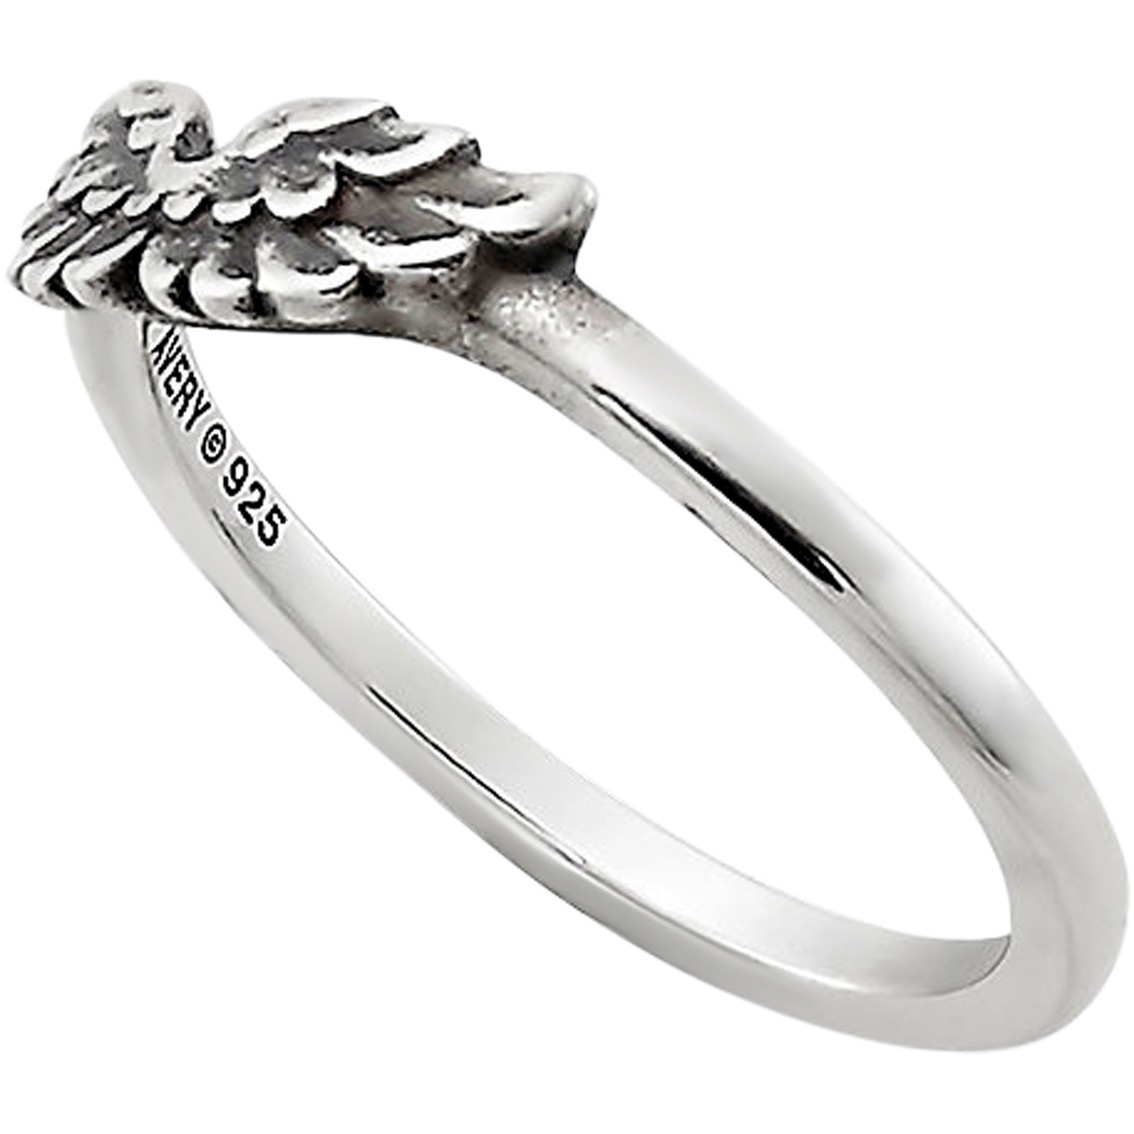 James Avery Sterling Silver Take Flight Ring - Image 2 of 2